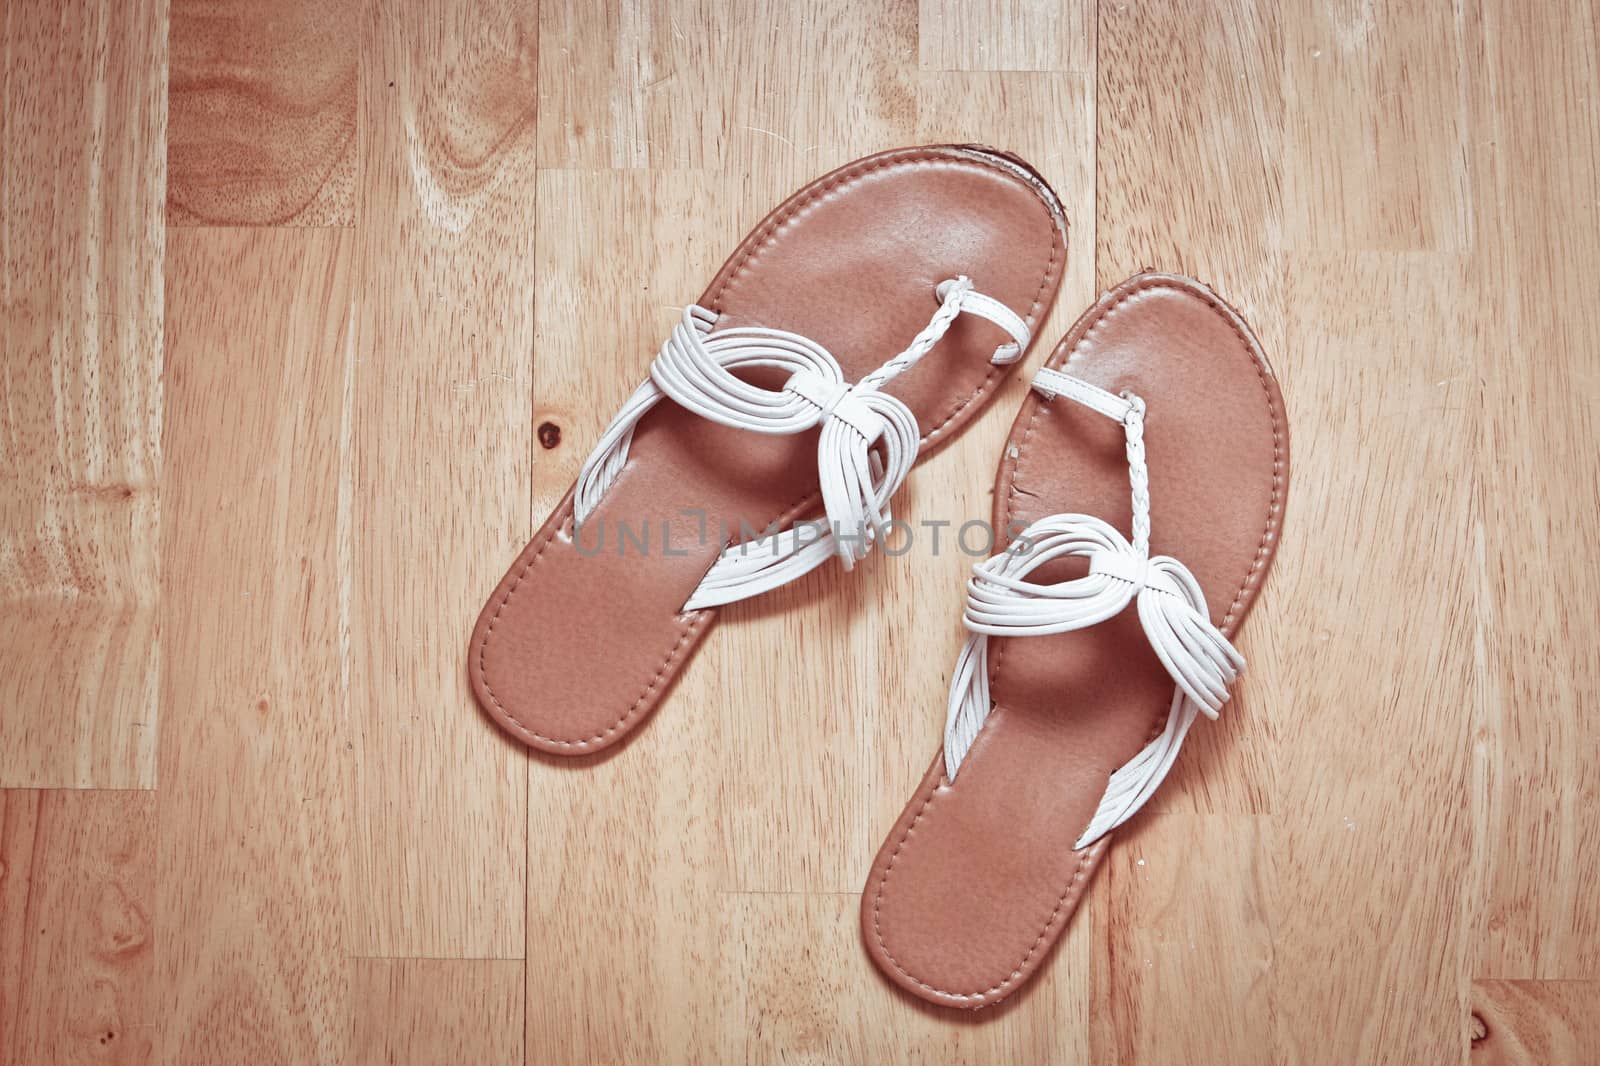 Pair of leather female sandals on a wooden floor